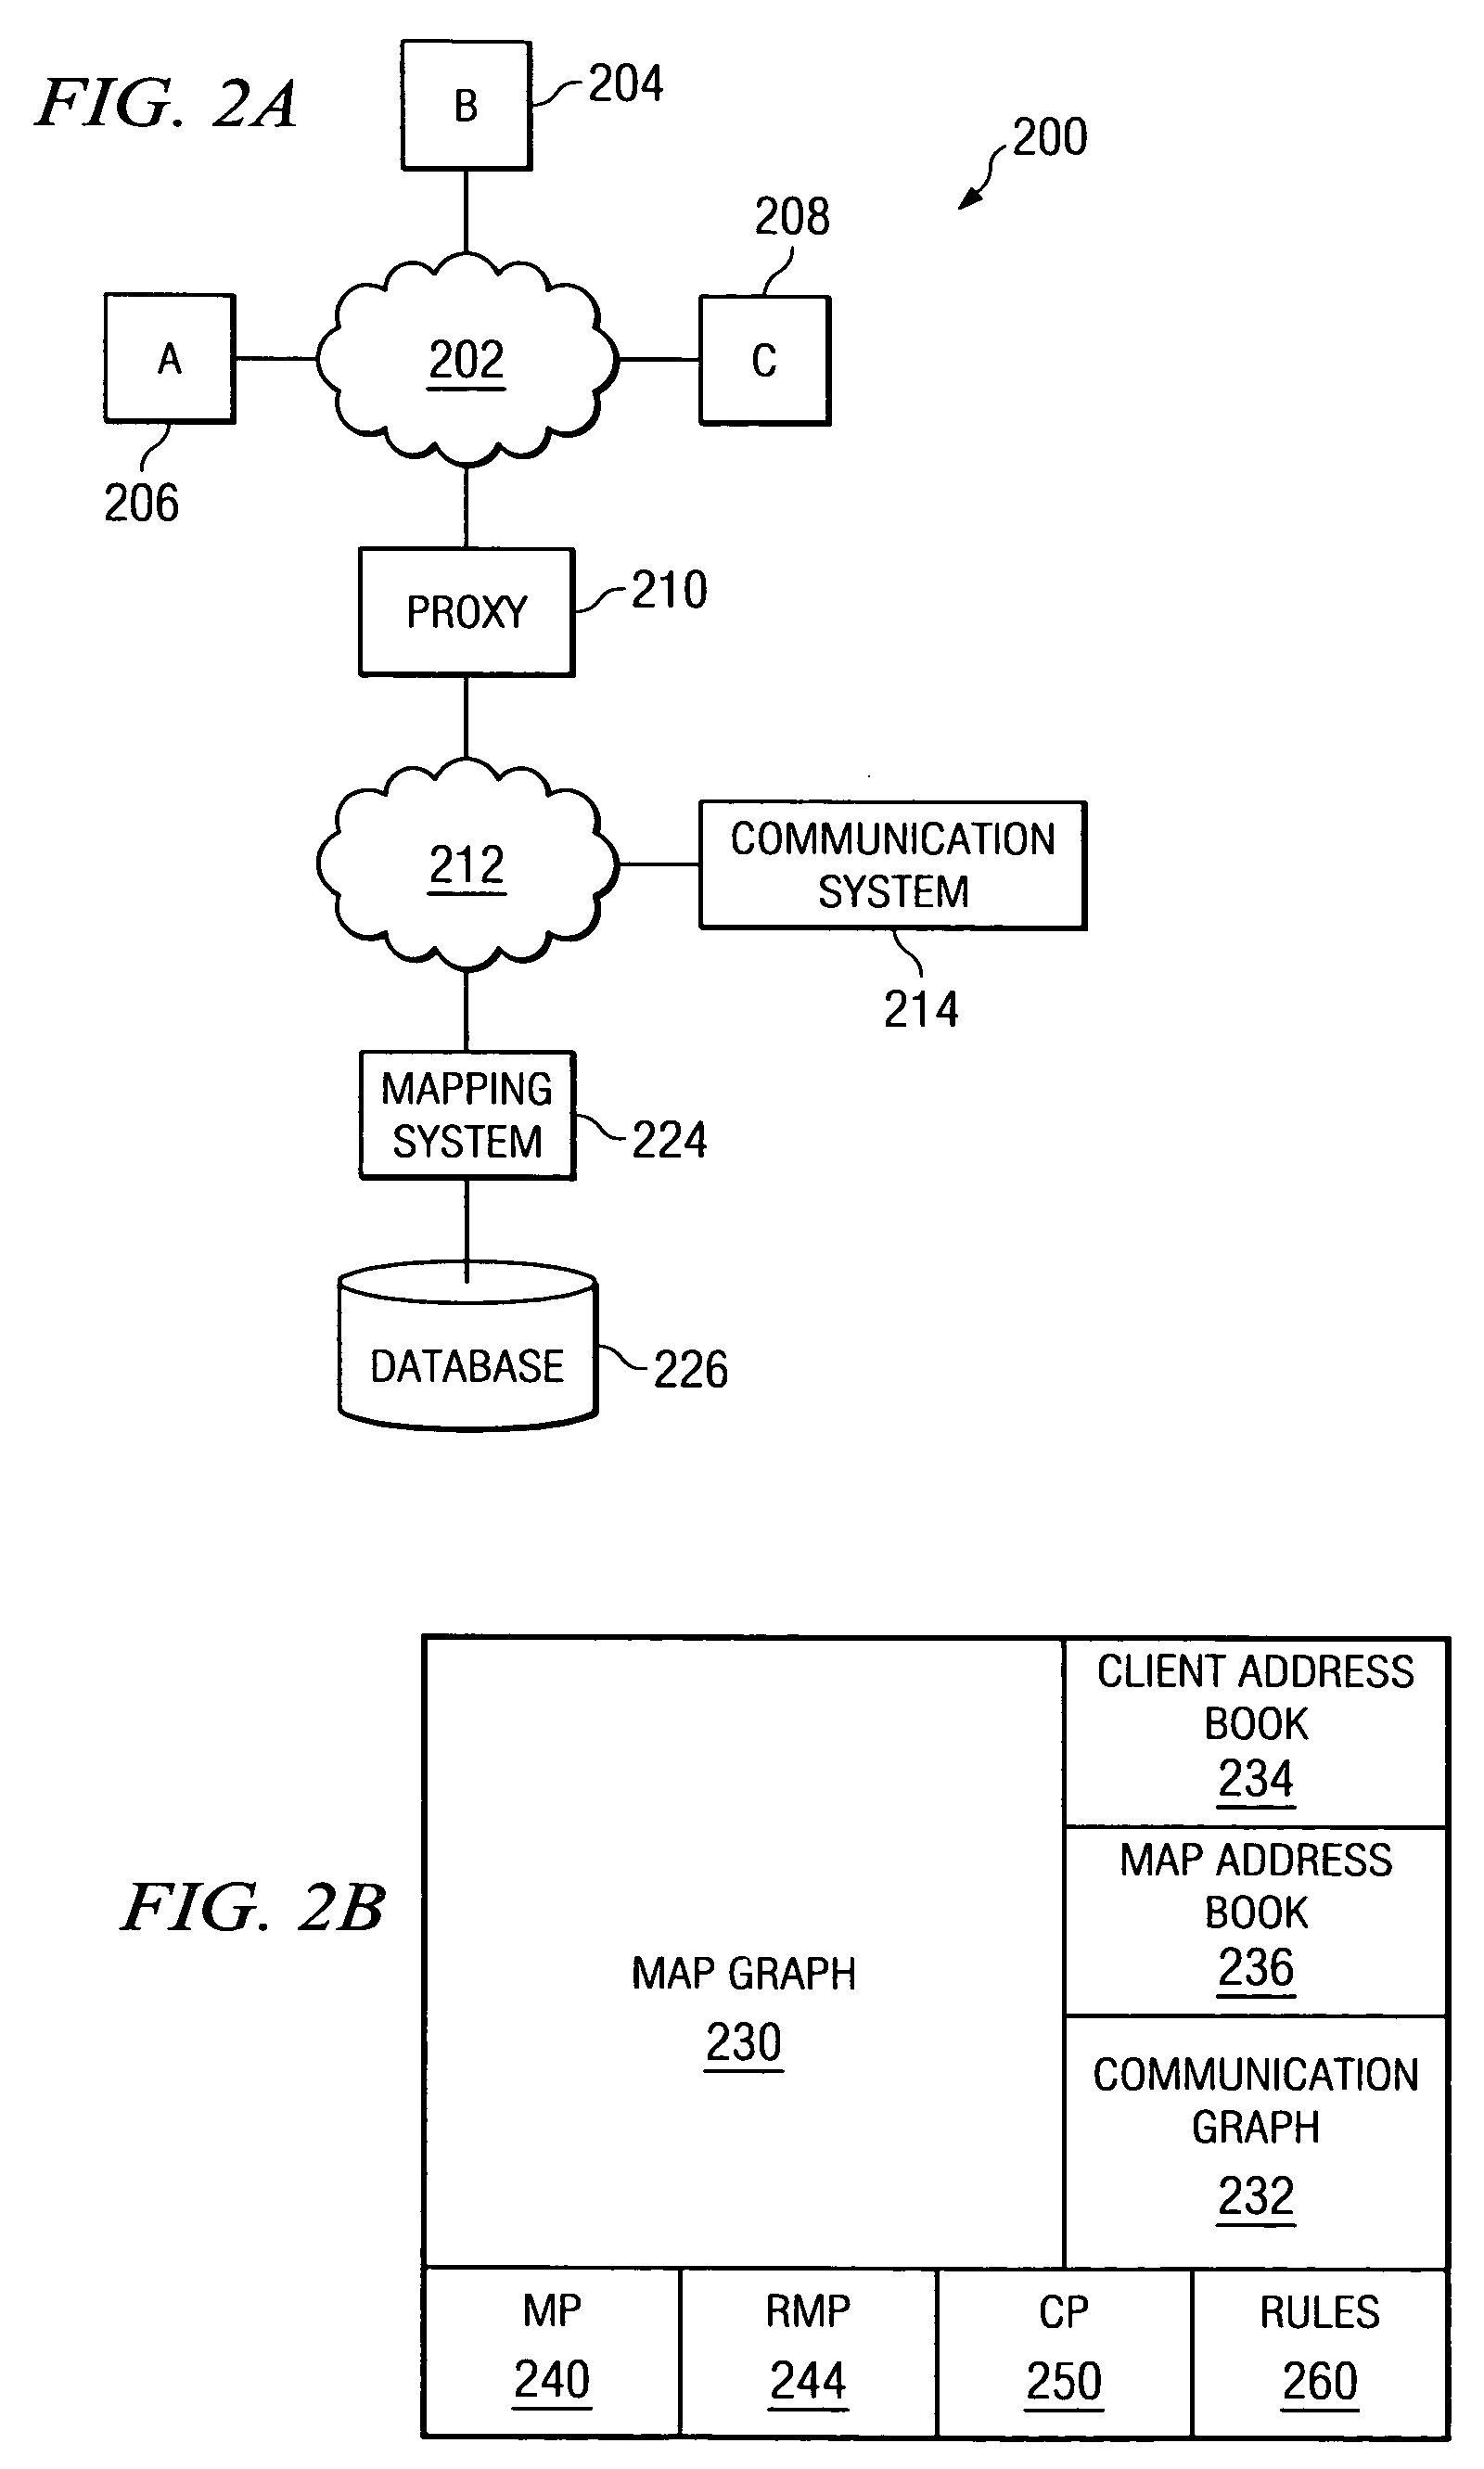 Method for distributing and geographically load balancing location aware communication device client-proxy applications